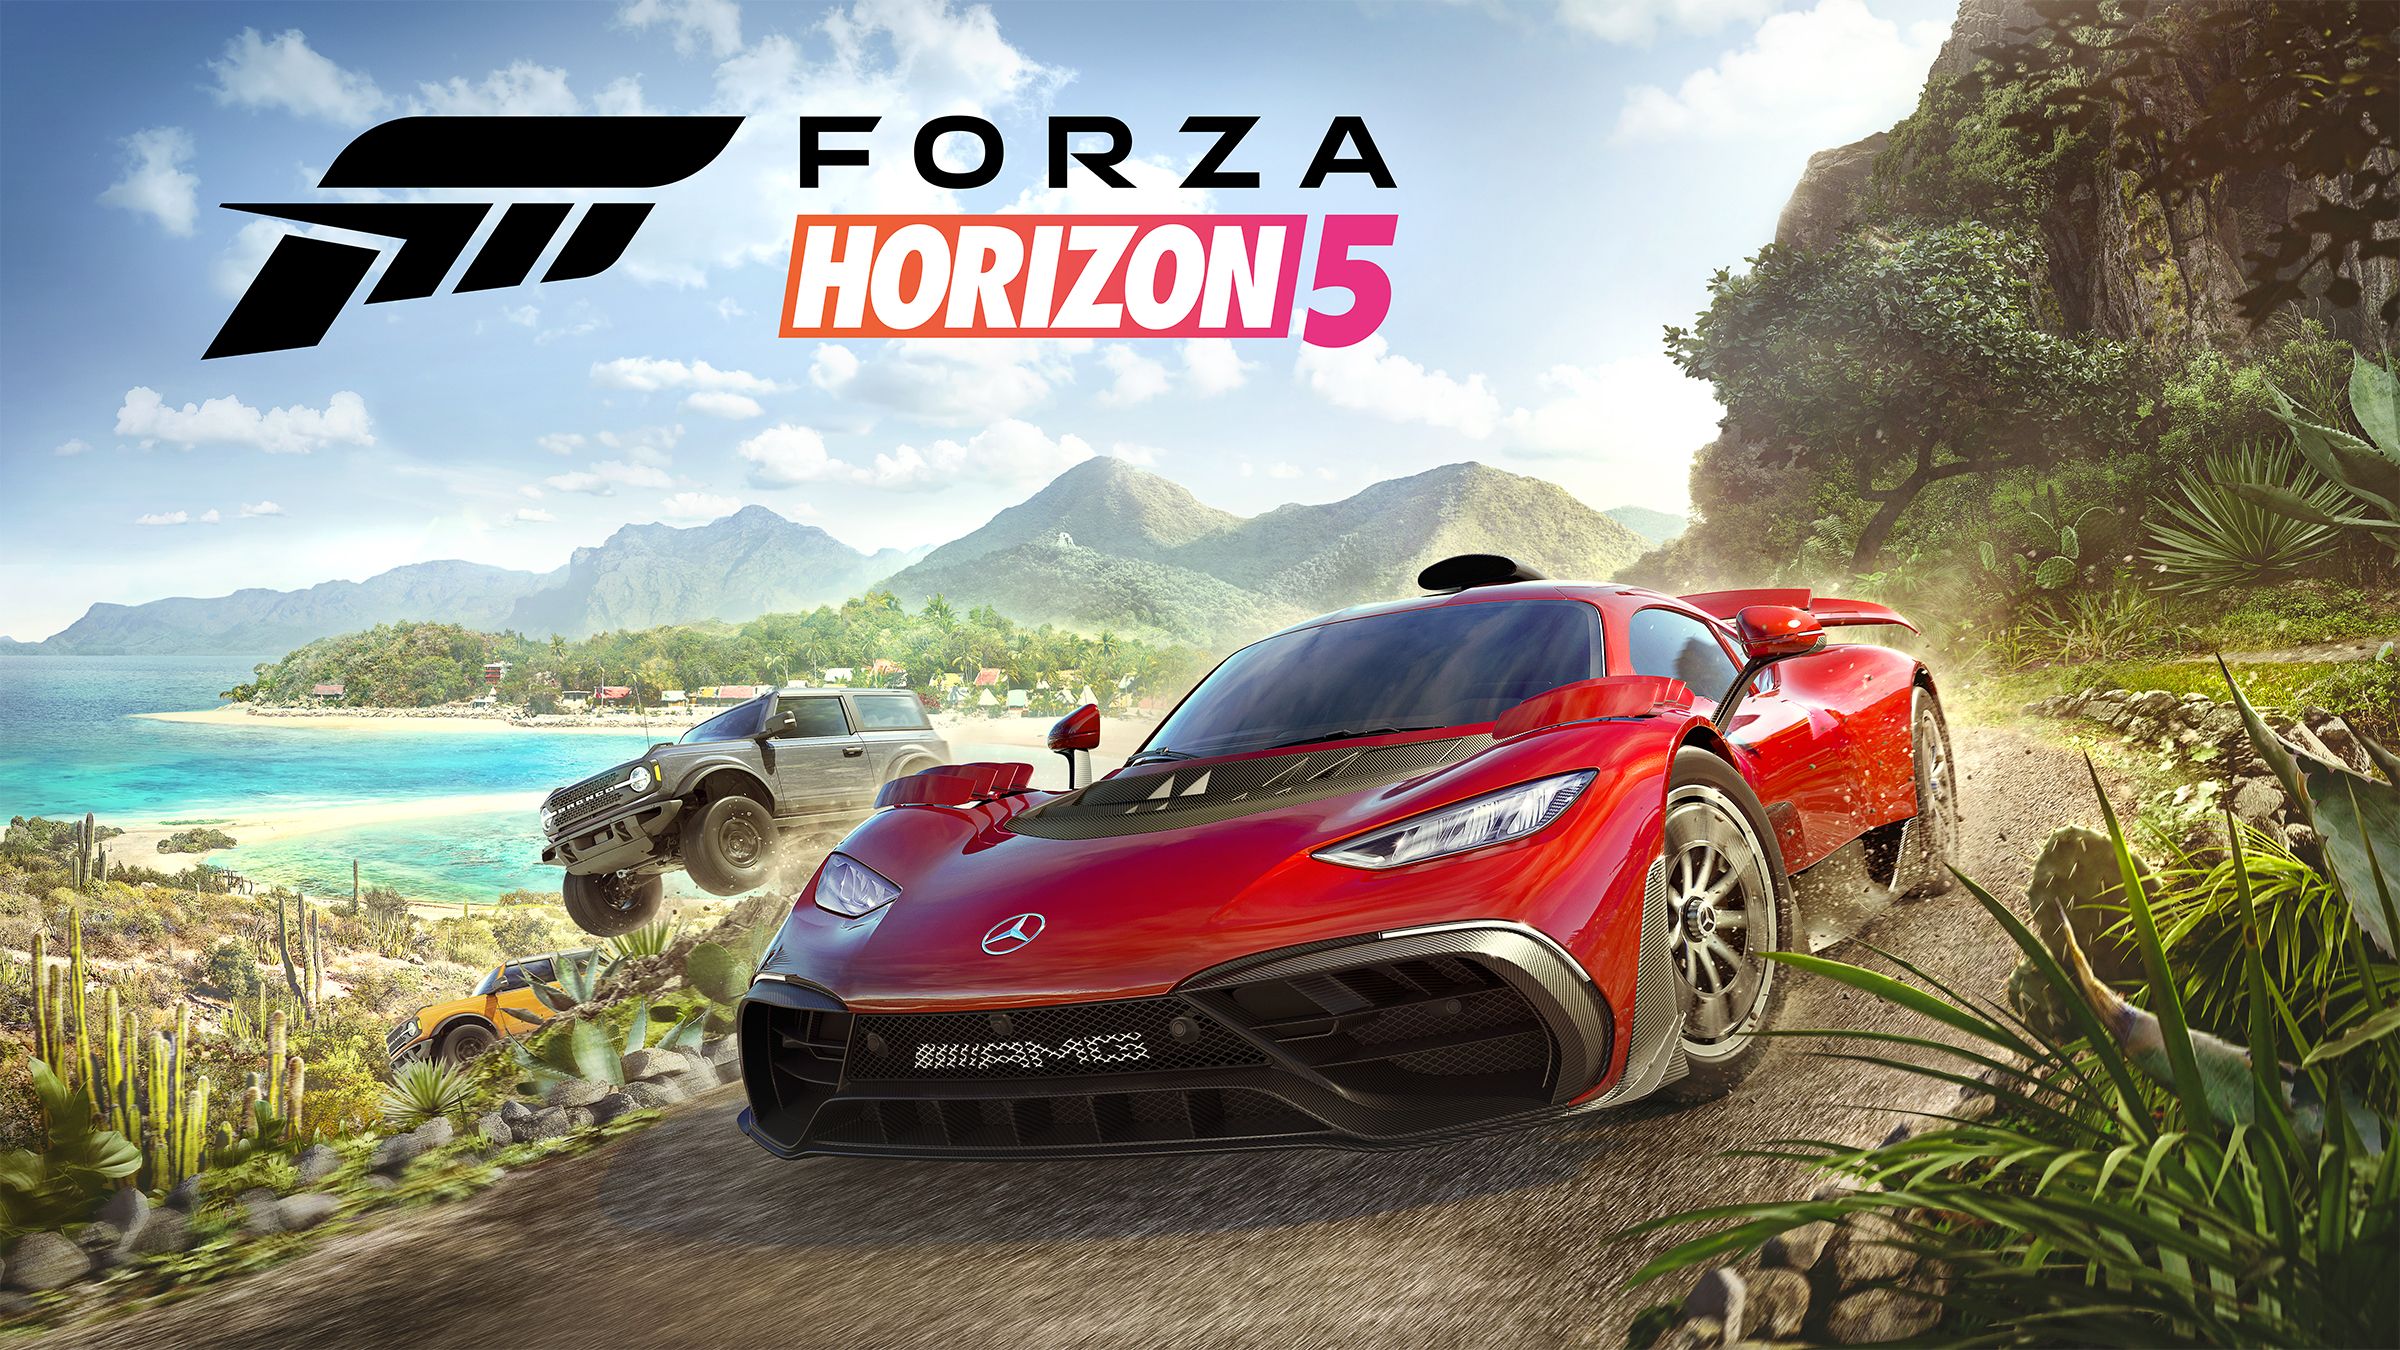 Forza Motorsport 5 is coming - The AI Blog